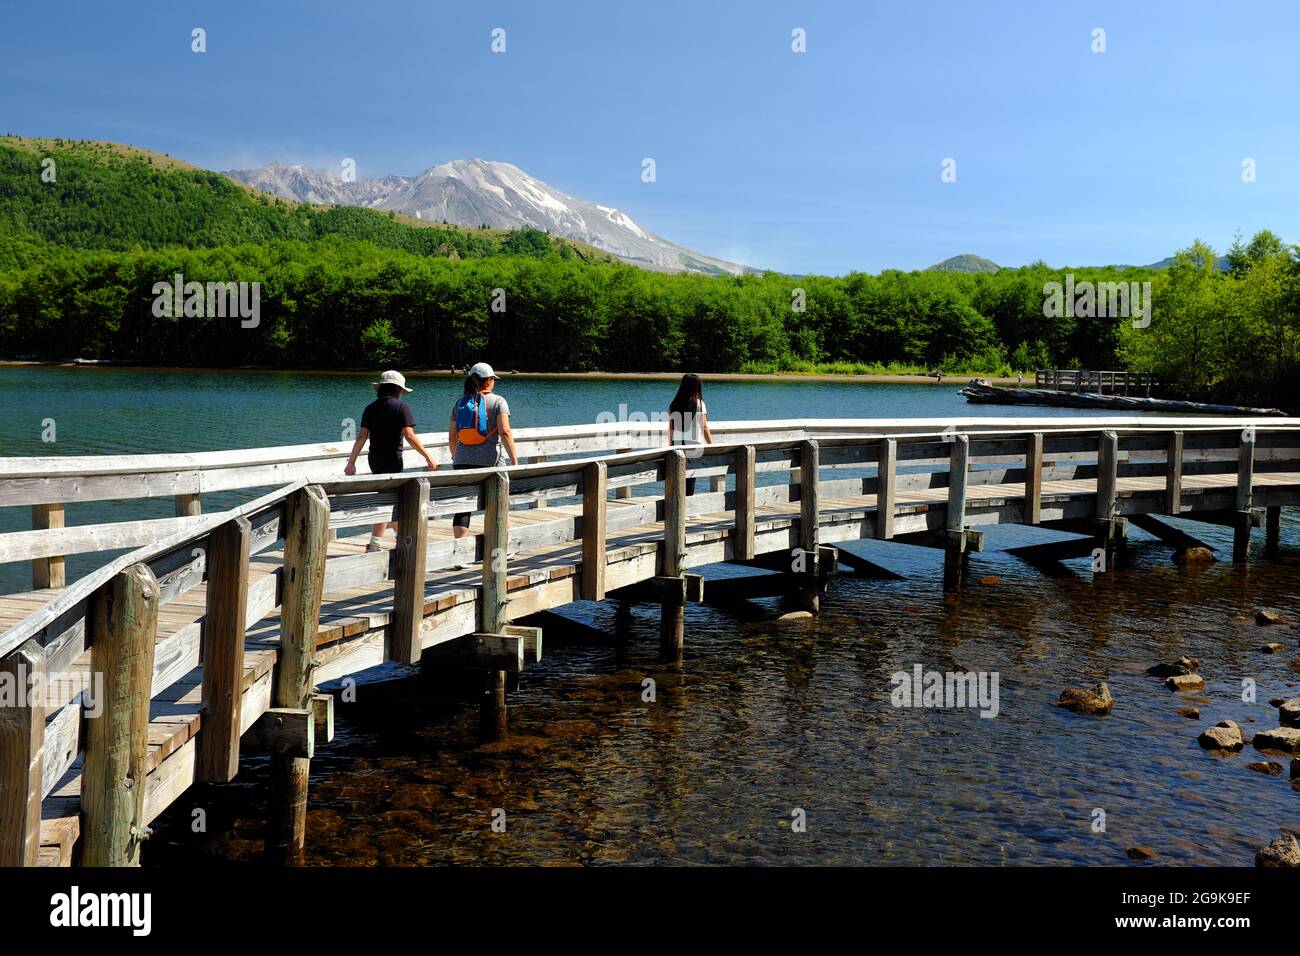 People walk along the interpretive path on Coldwater Lake in Washington State. Mt. St. Helens is in the background. Stock Photo